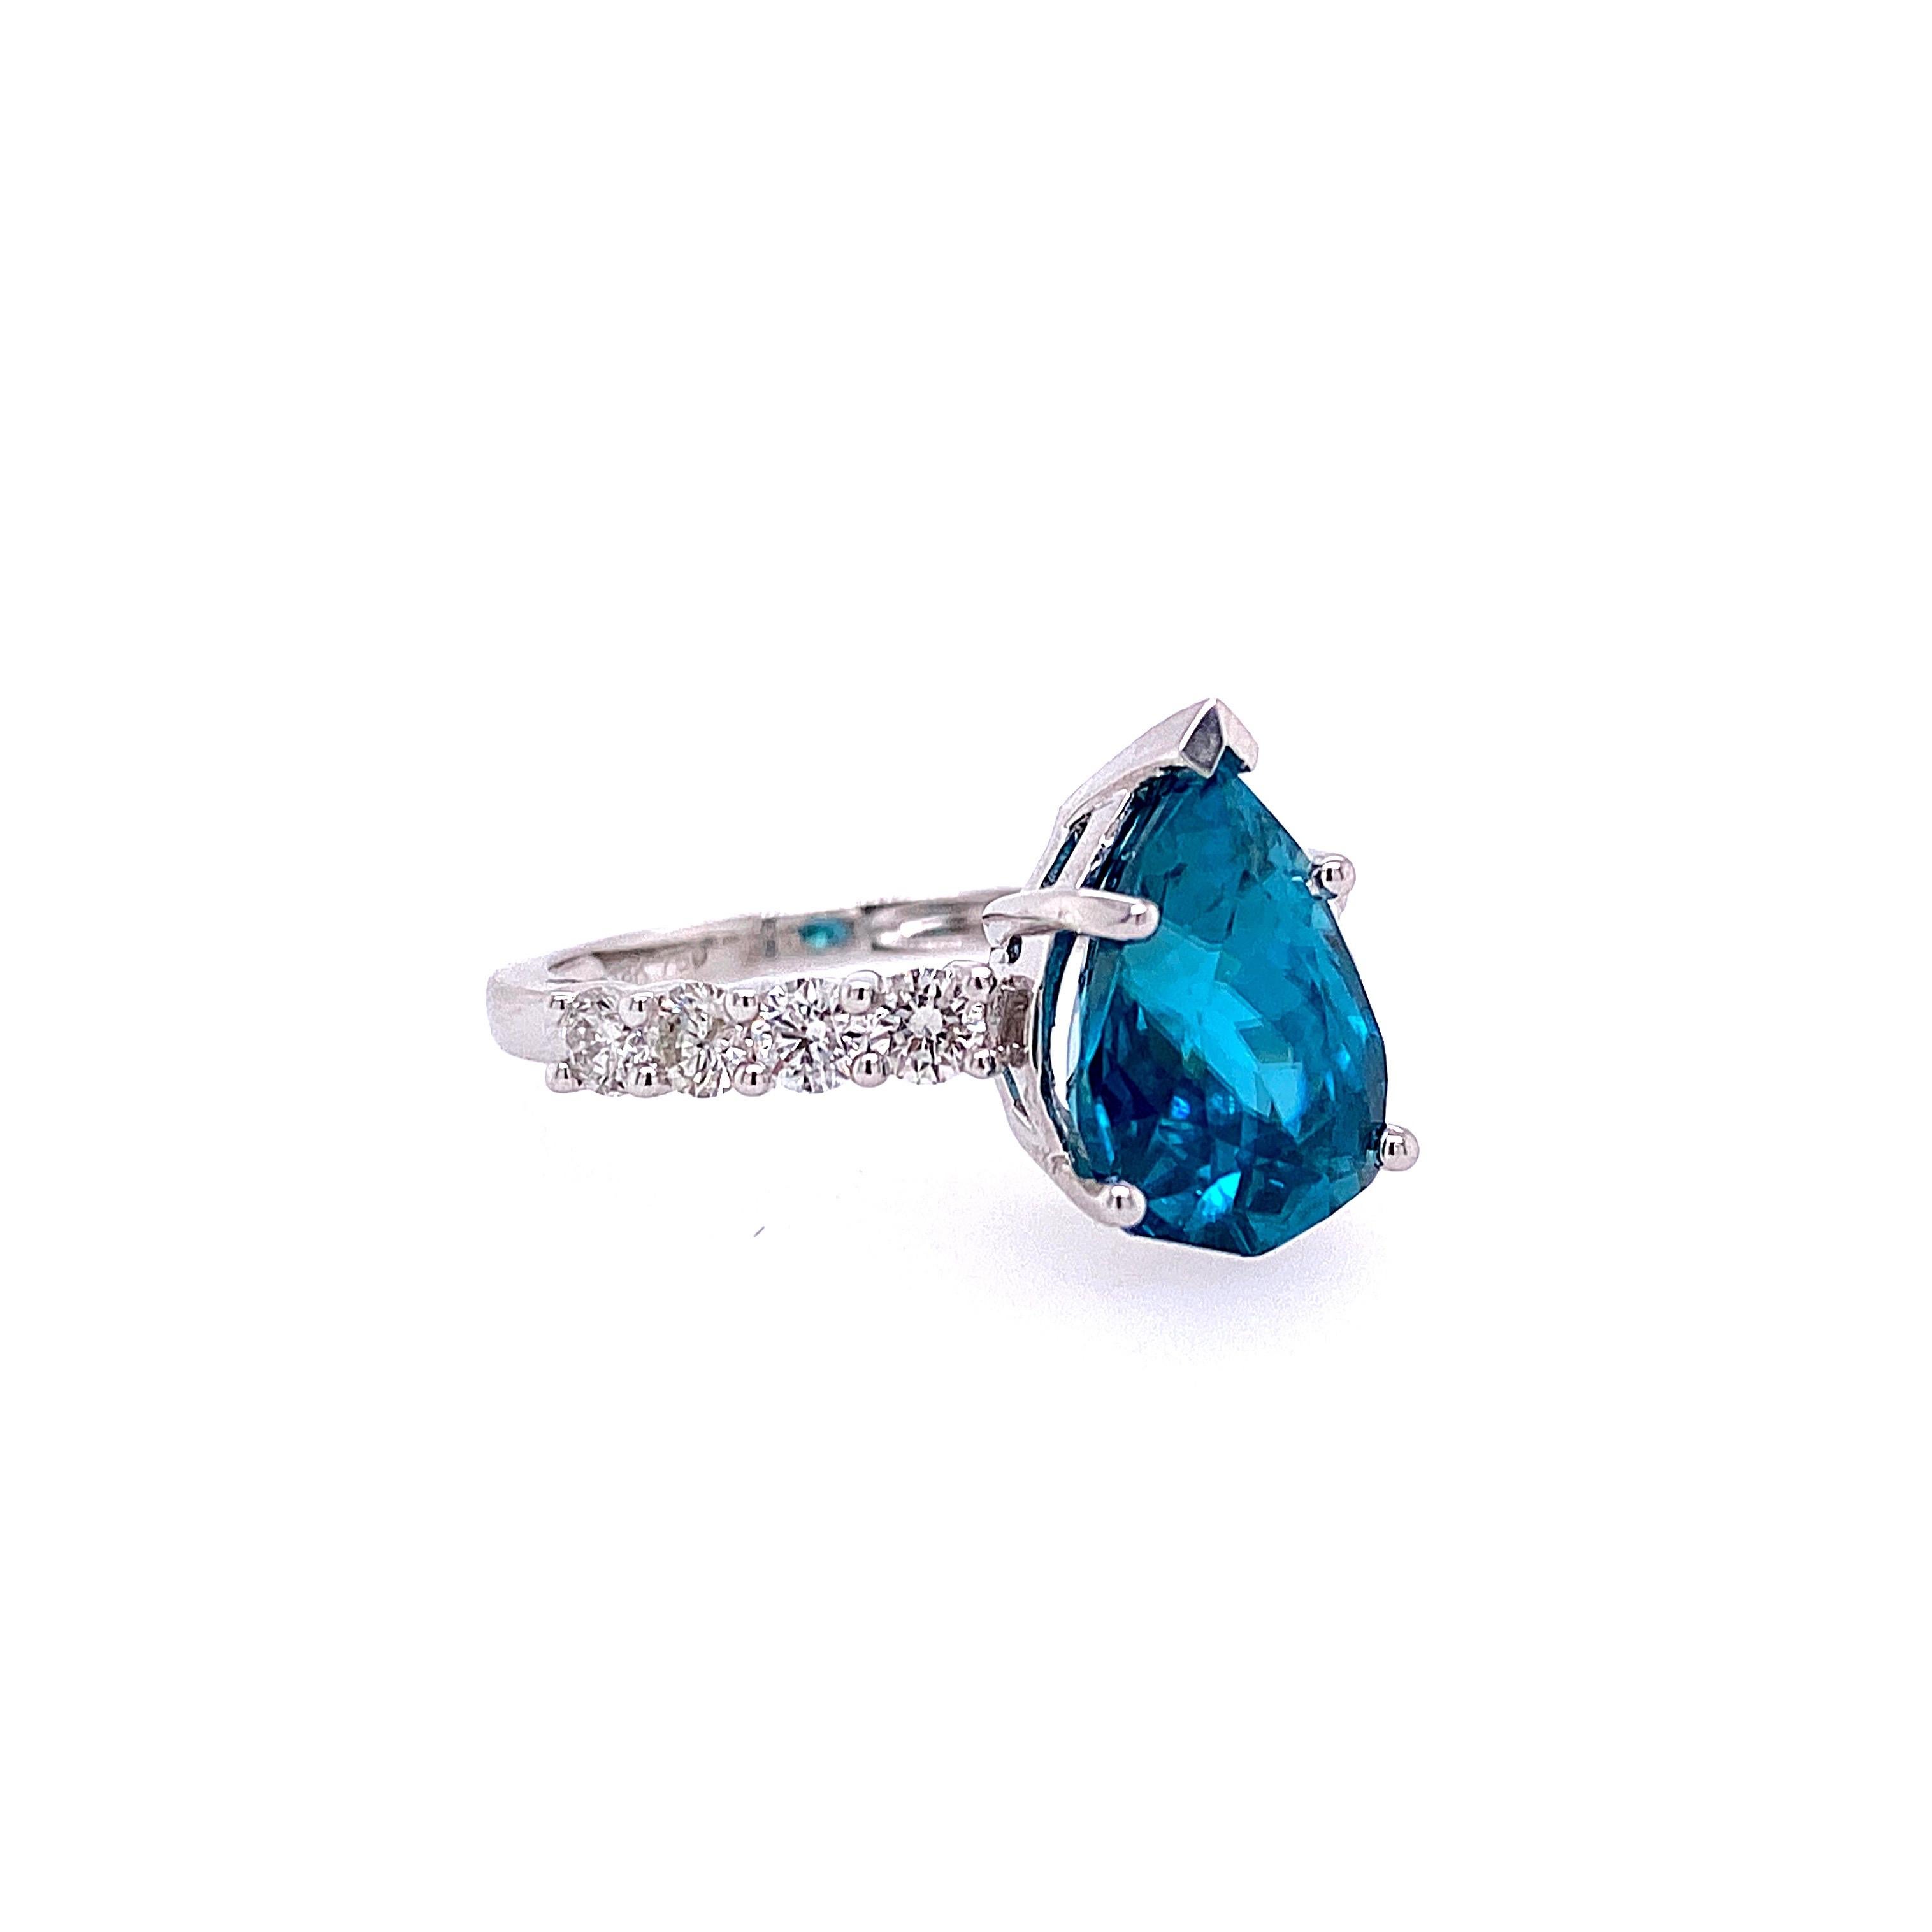 Pear Cut 5.52 Carat Pear Blue Zircon and Diamond Cocktail Ring For Sale